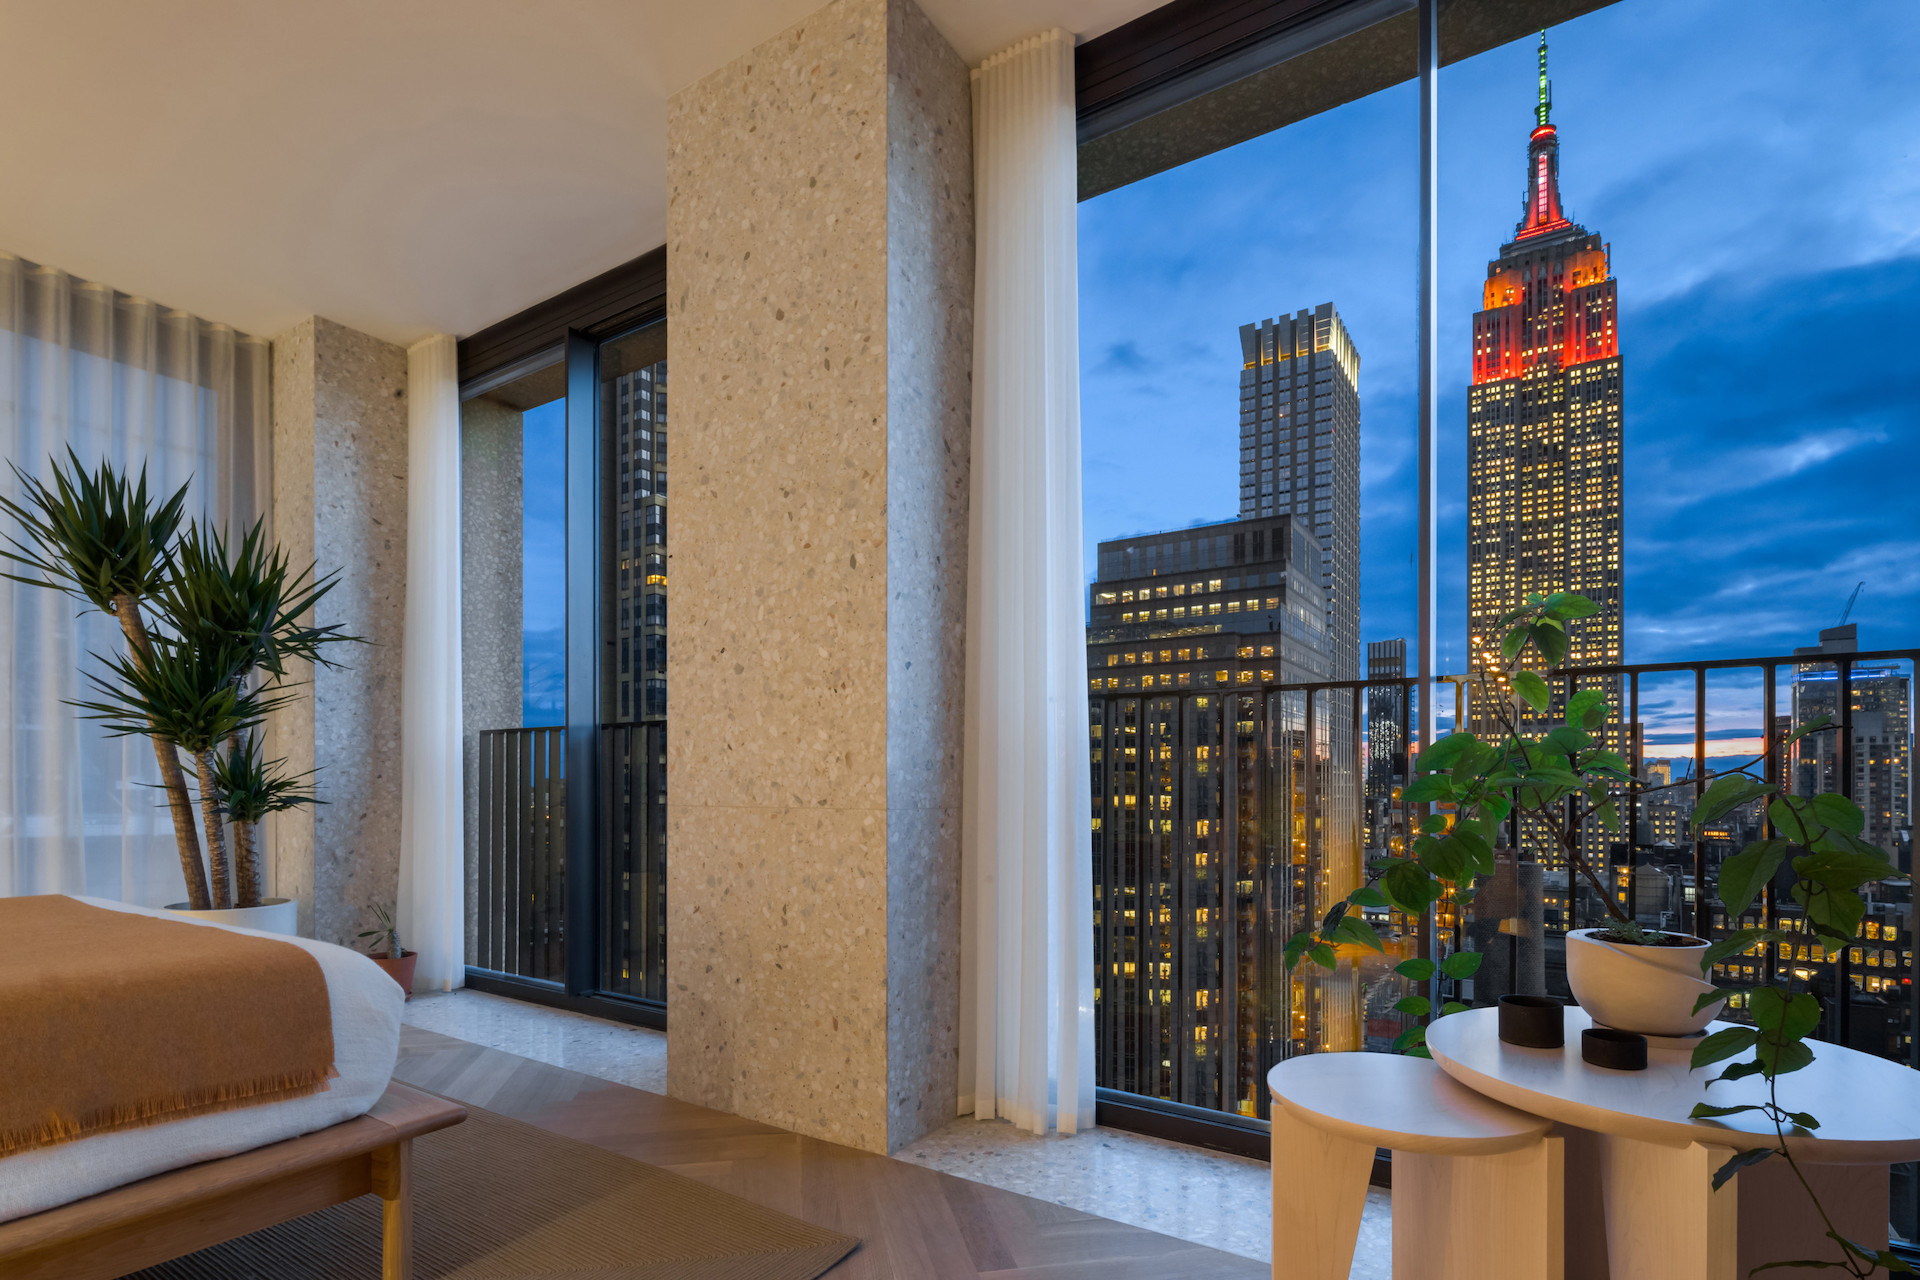 image looking out the window from the interior of the building. View shows Empire State building at night